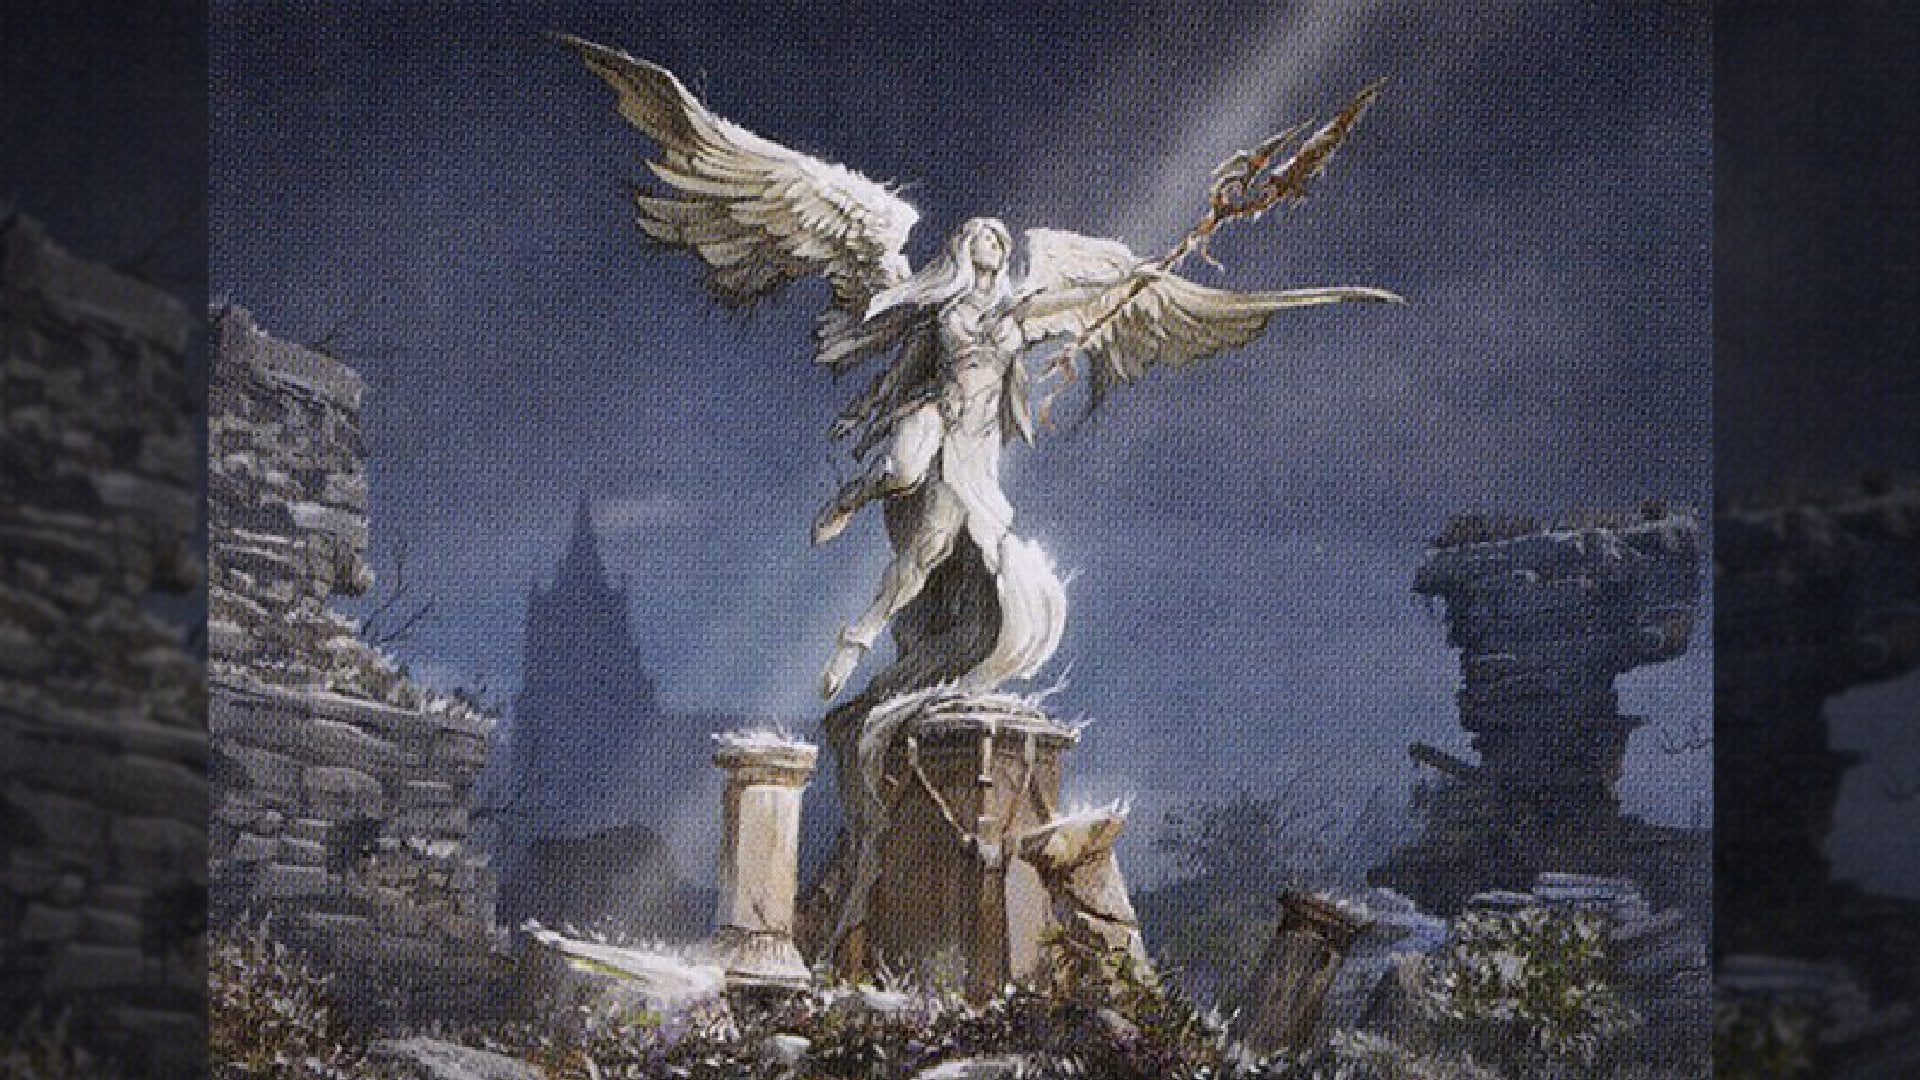 Art from the MTG card Avacyn's Memorial which depicts the statue of an angel among rubble.